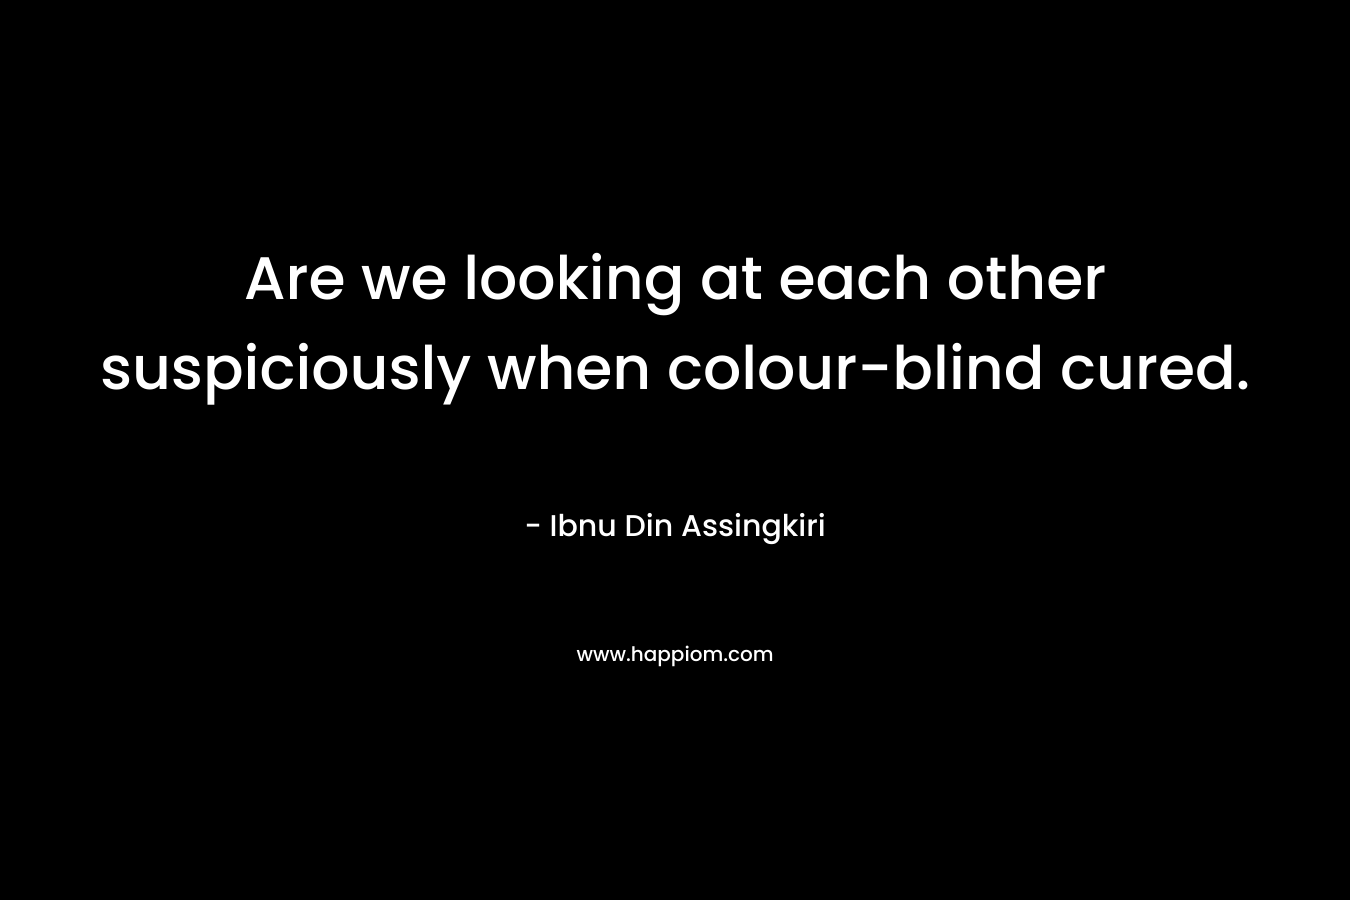 Are we looking at each other suspiciously when colour-blind cured. – Ibnu Din Assingkiri